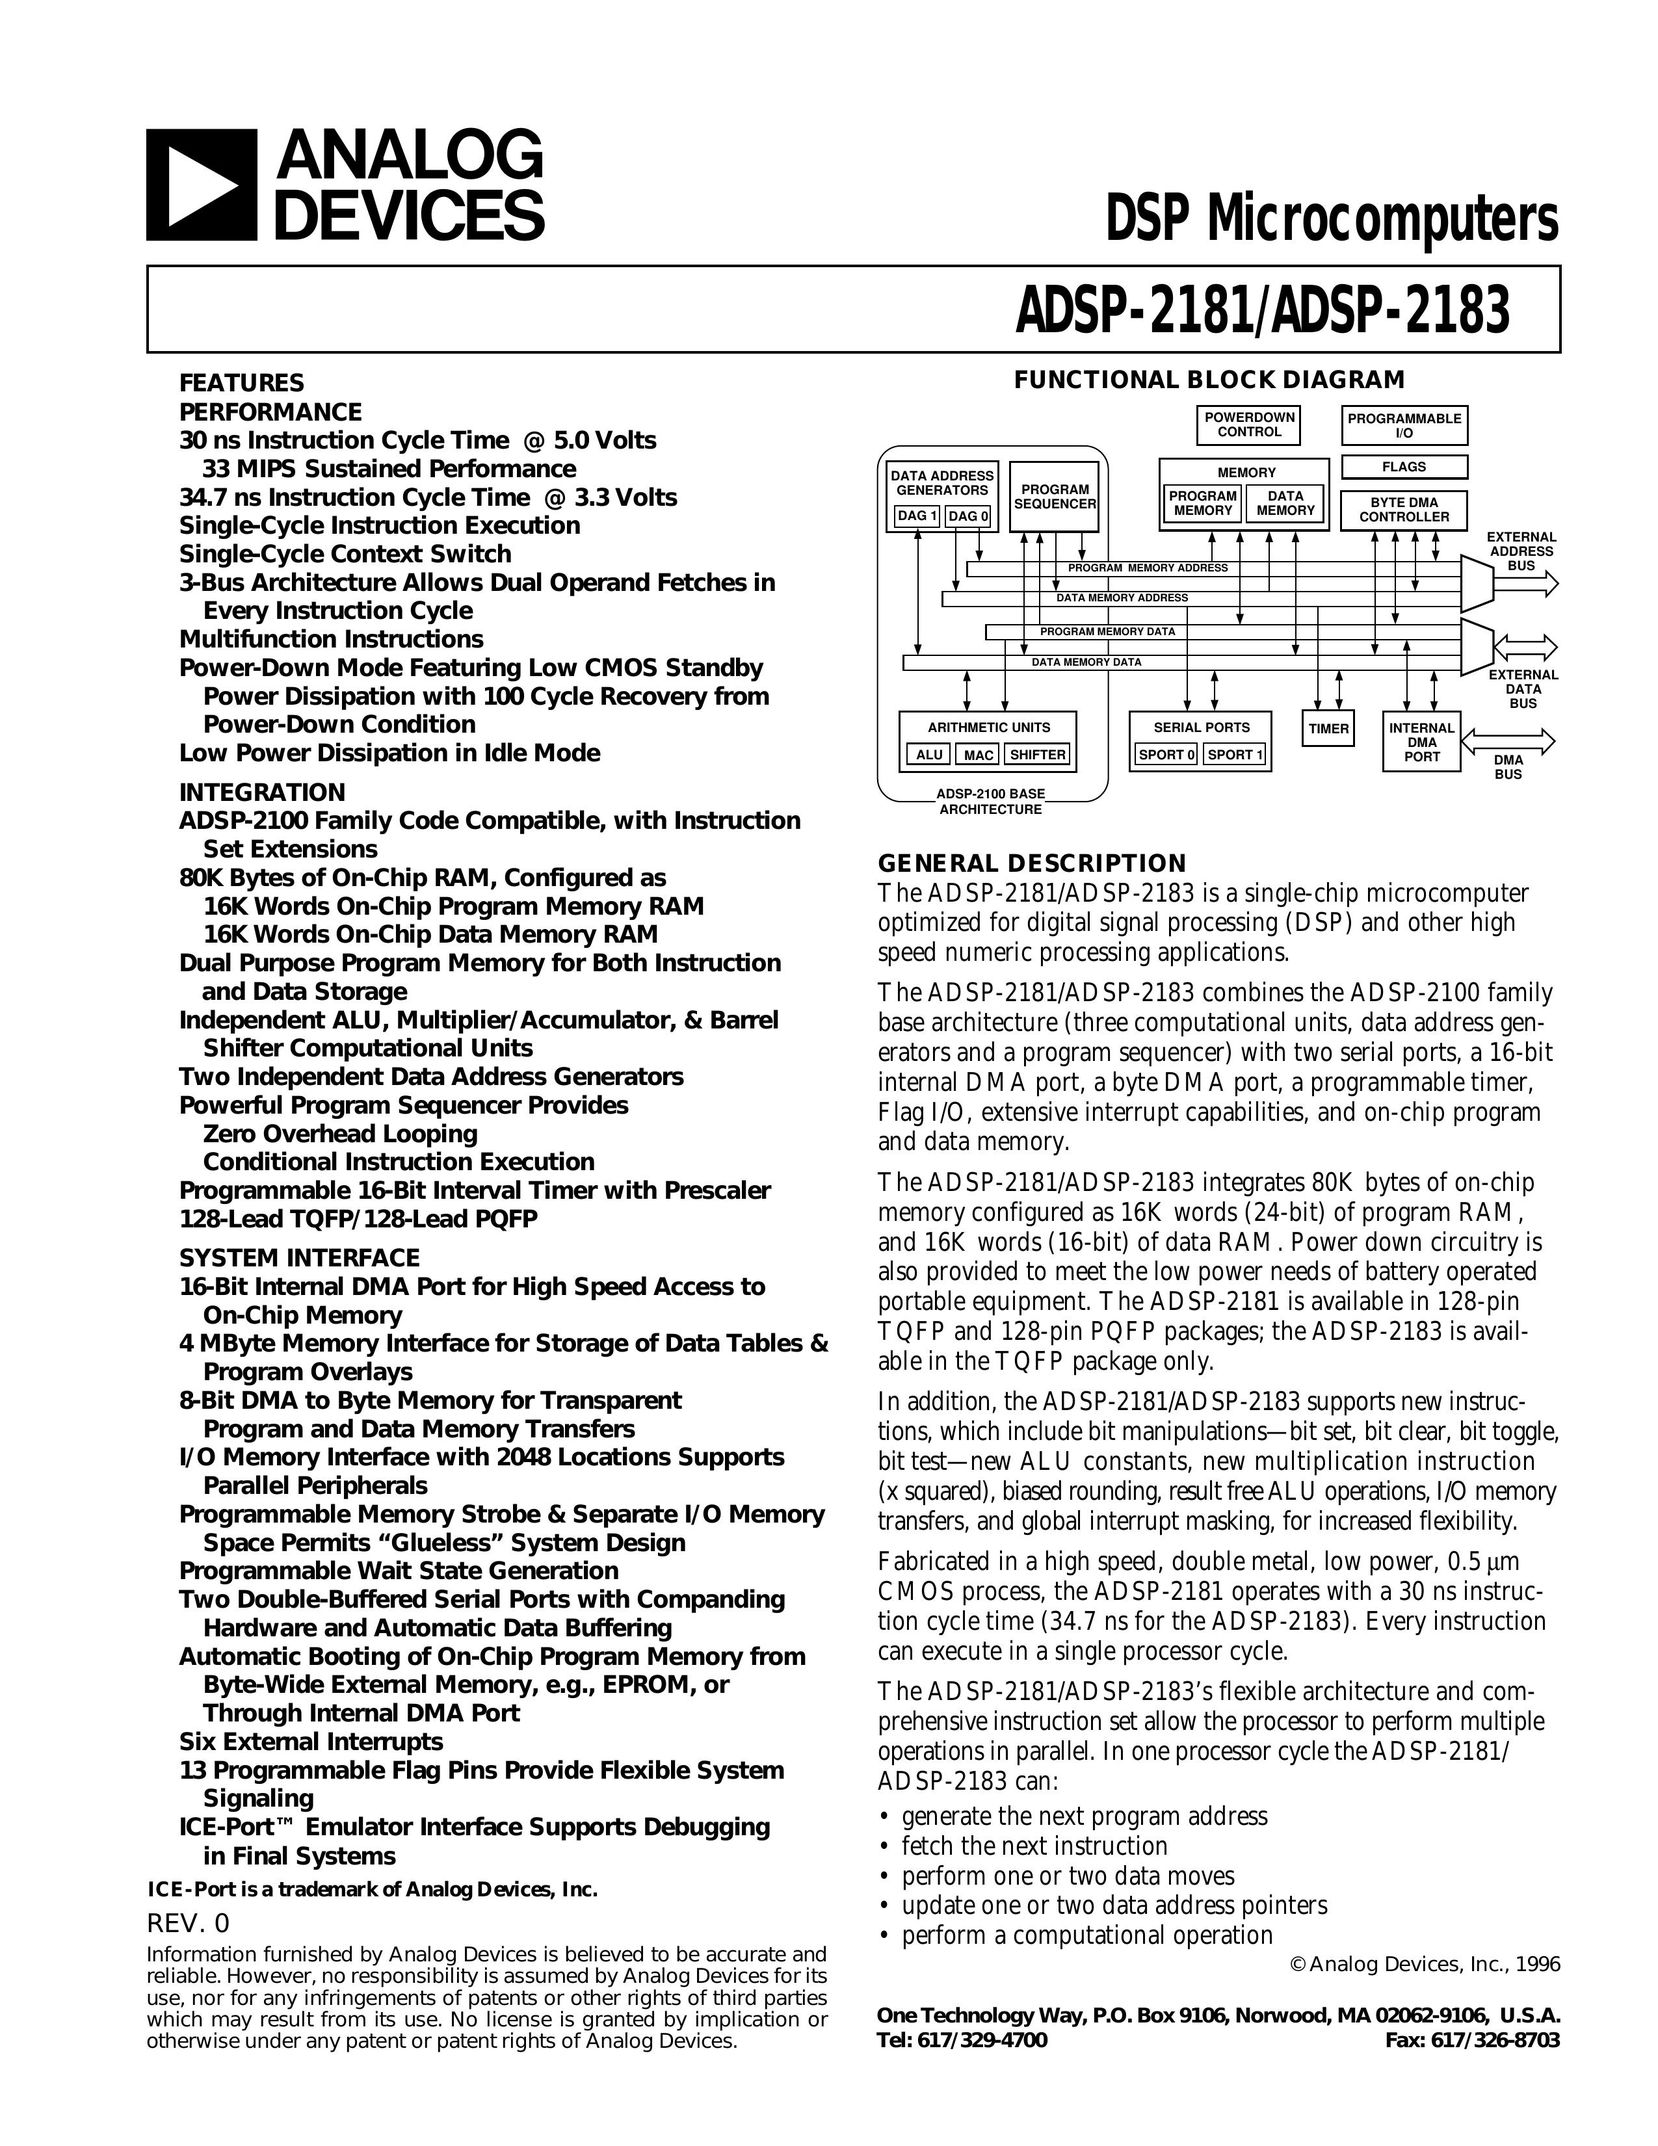 Analog Devices ADSP-2181 Network Card User Manual